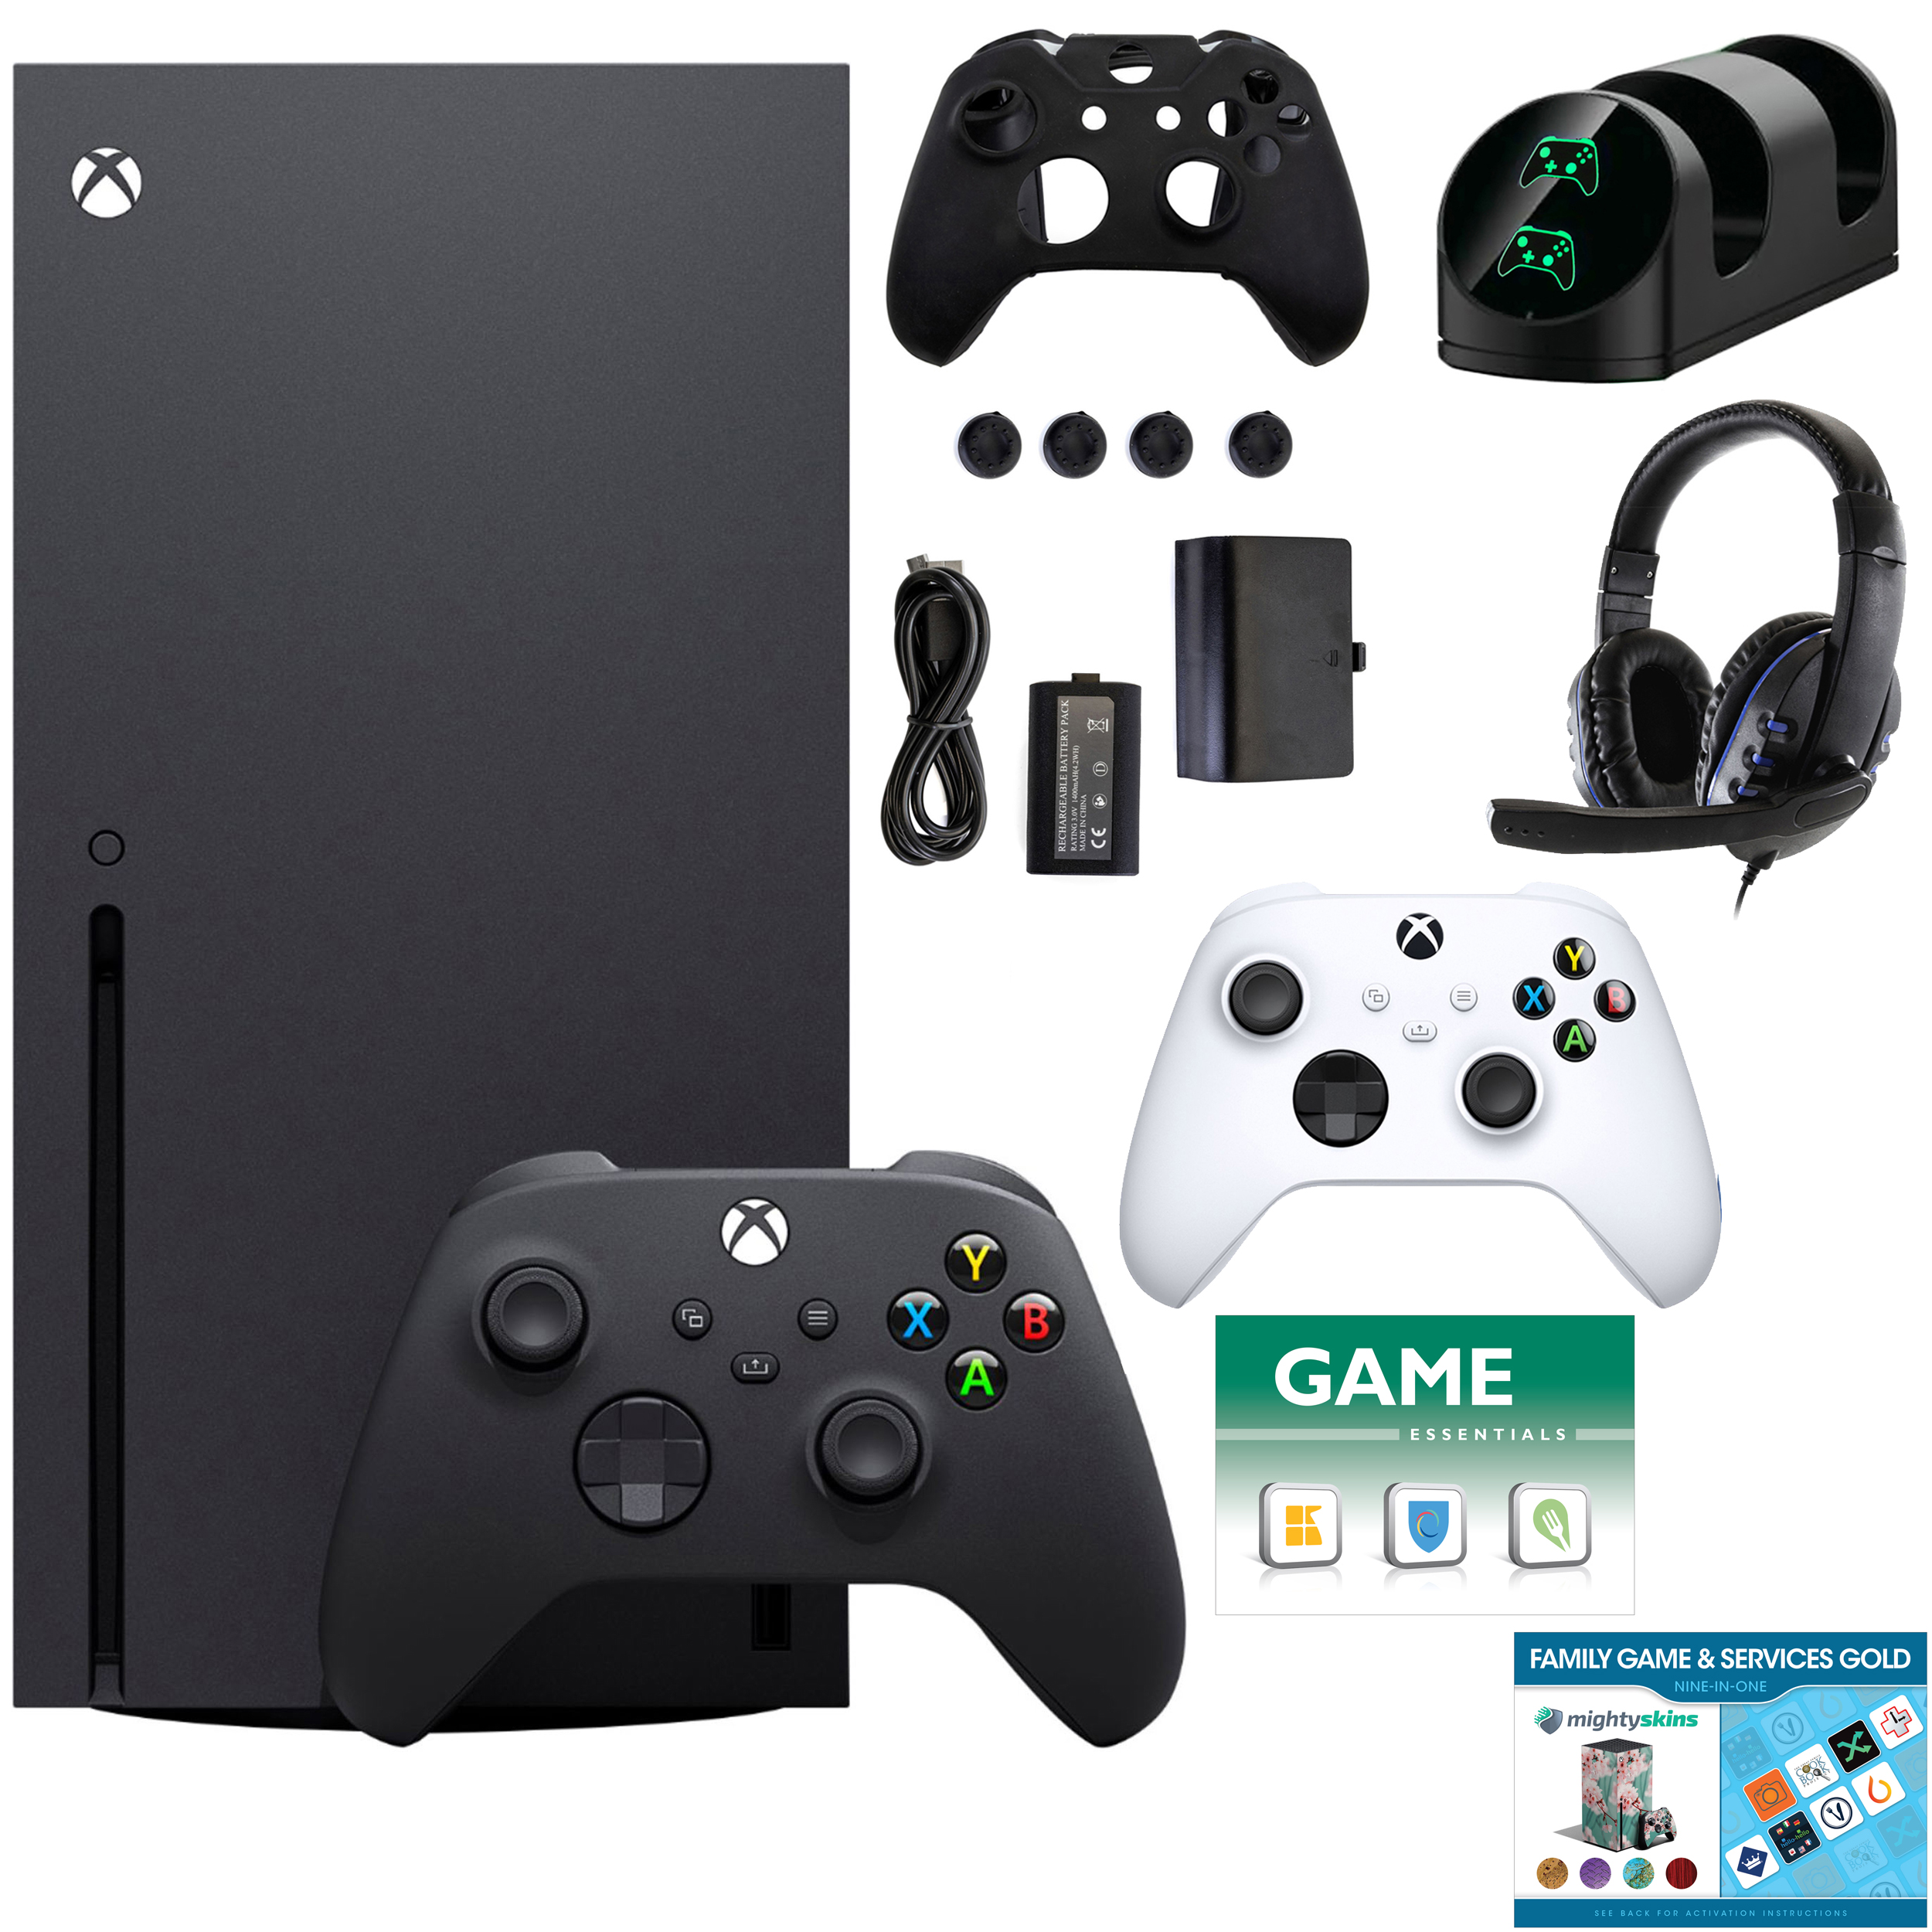 Microsoft Xbox Series X 1TB Console with Extra White Controller Accessories Kit and 2 Vouchers